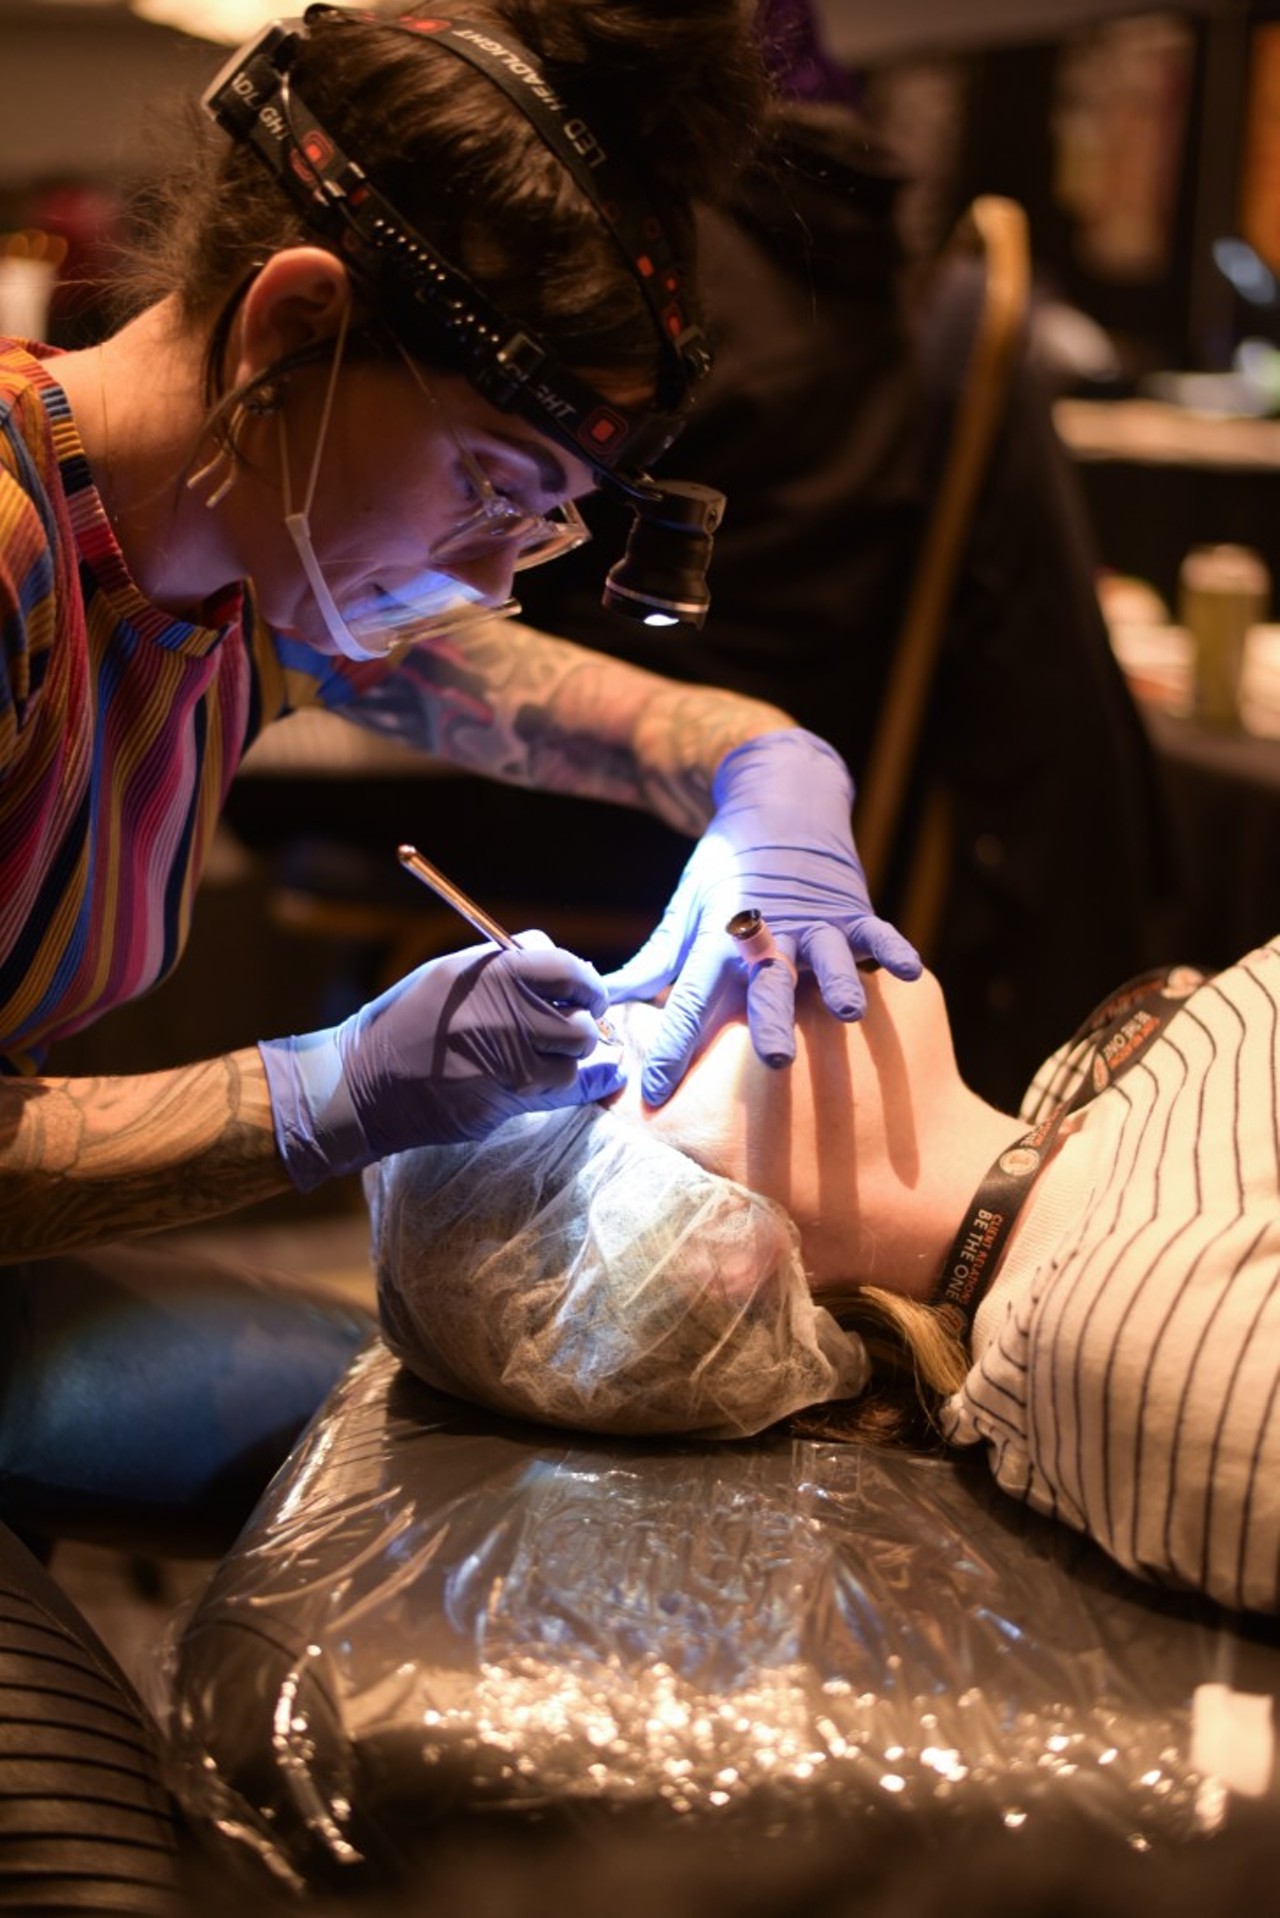 Everything we saw at the 24th Annual Motor City Tattoo Expo in Detroit